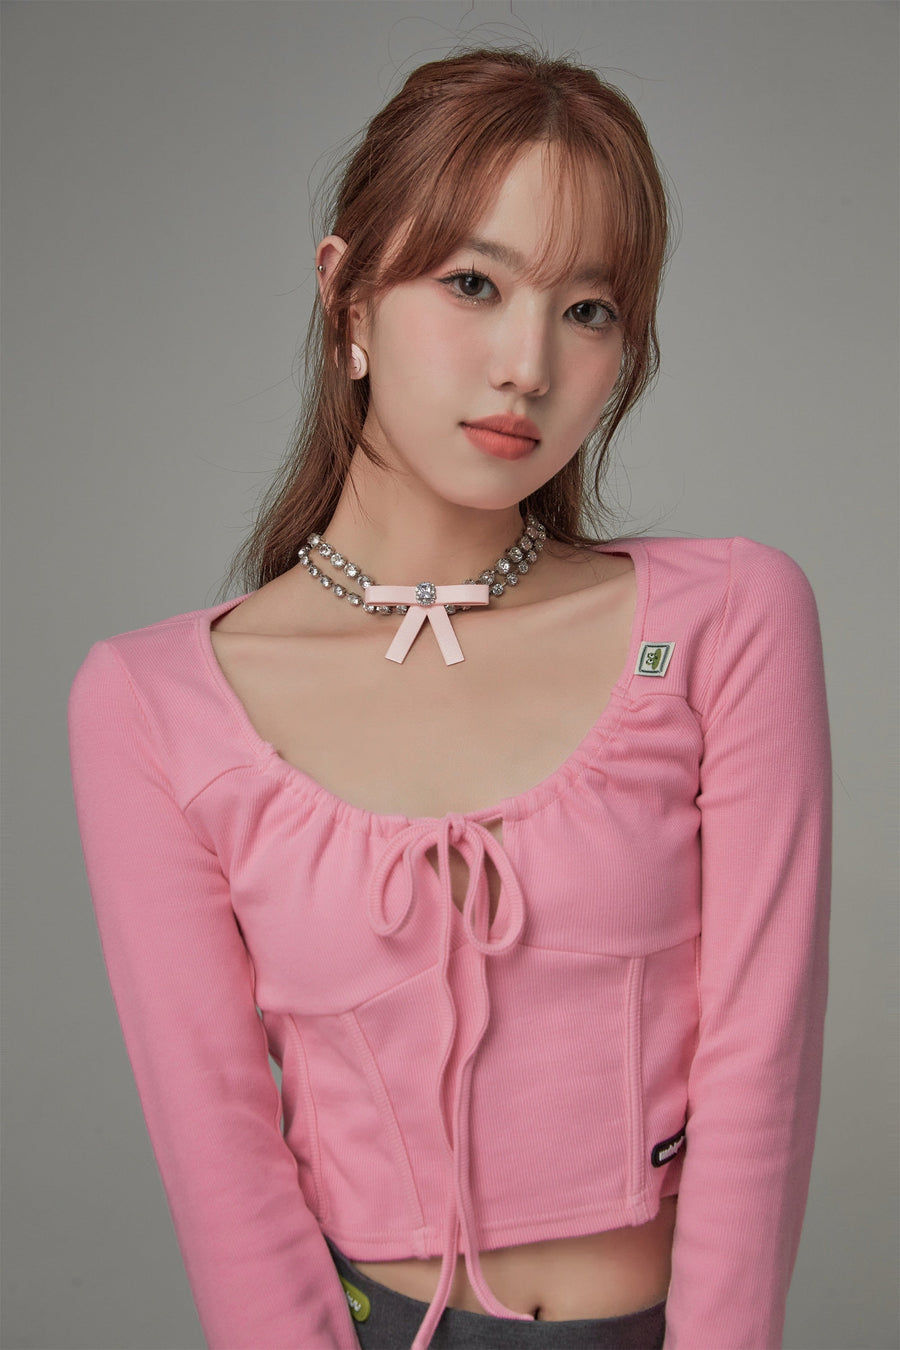 CHUU Deep Tied Round Neck Long Sleeves Top